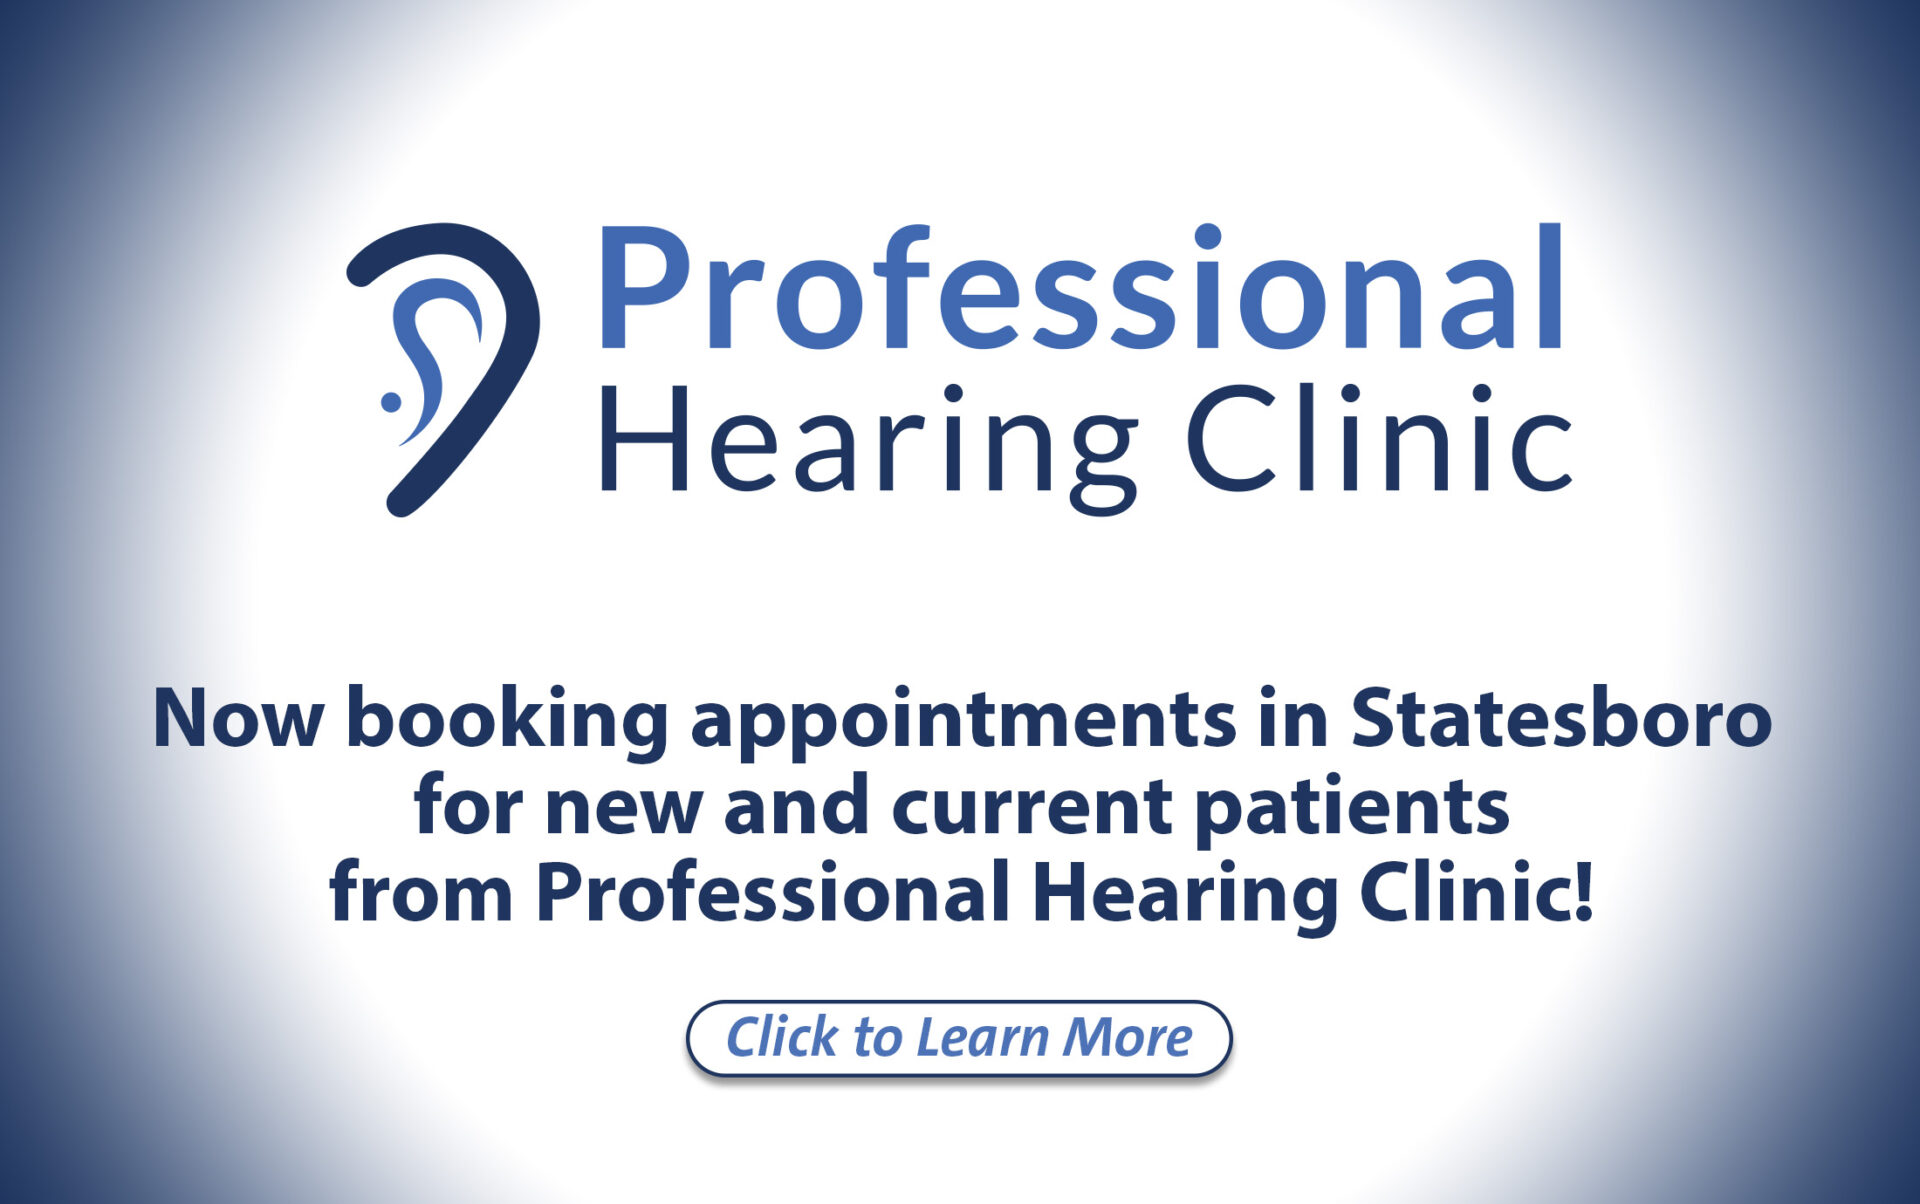 Now booking appointments in Statesboro for new and current patients from professional Hearing Clinic!